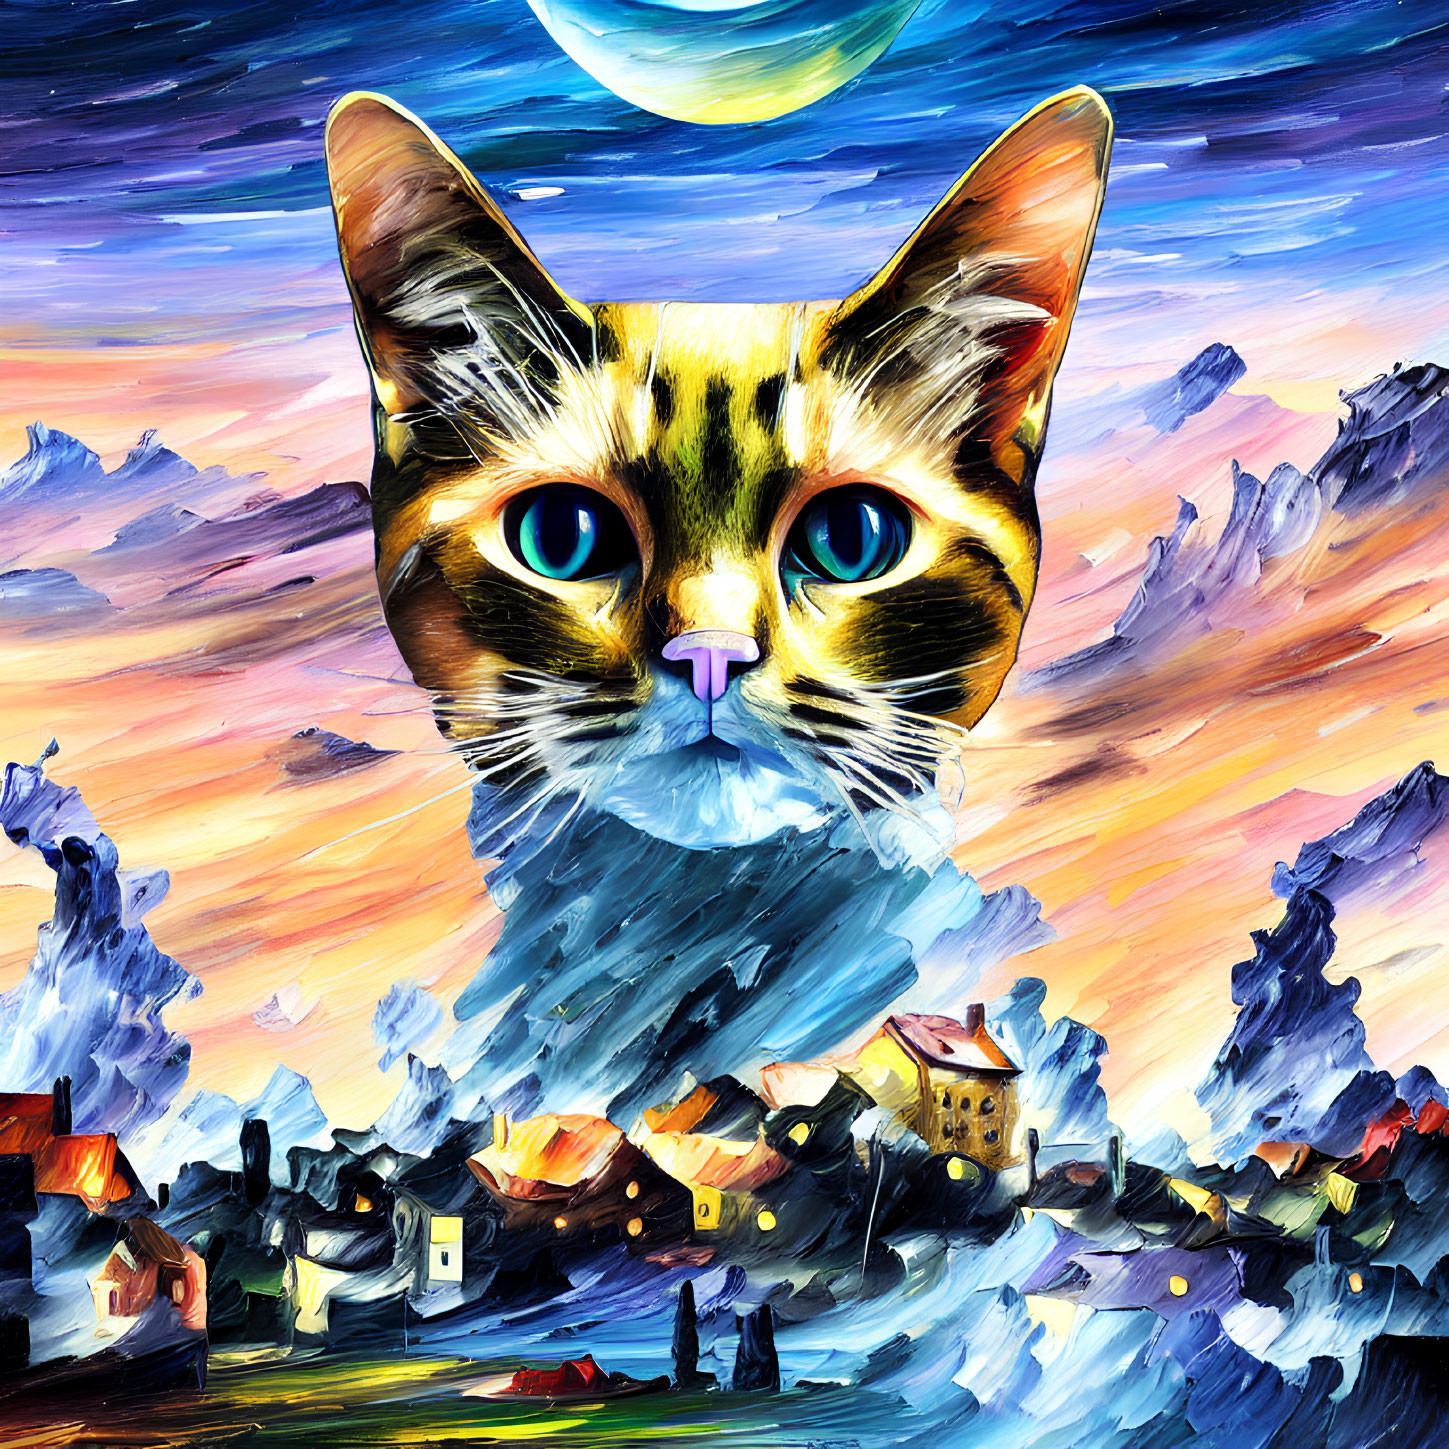 Colorful Cat Head Painting in Surreal Landscape with Cosmic Sky